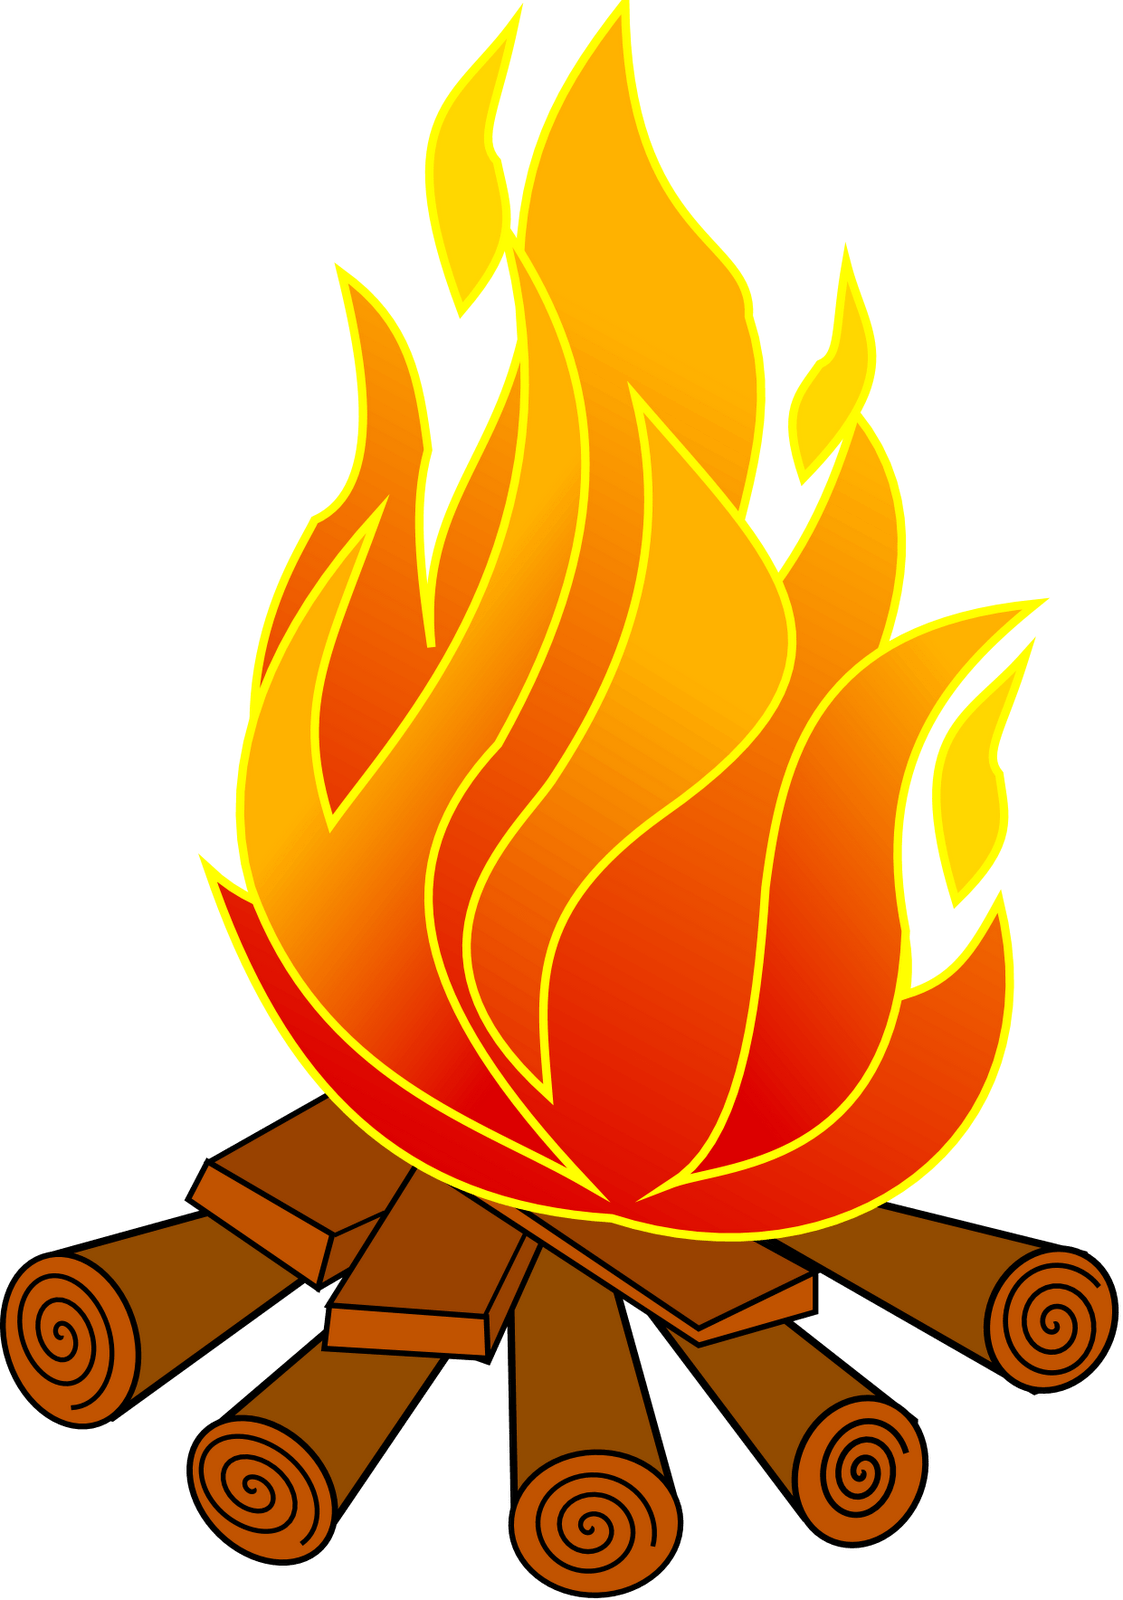 Animated Fire Image